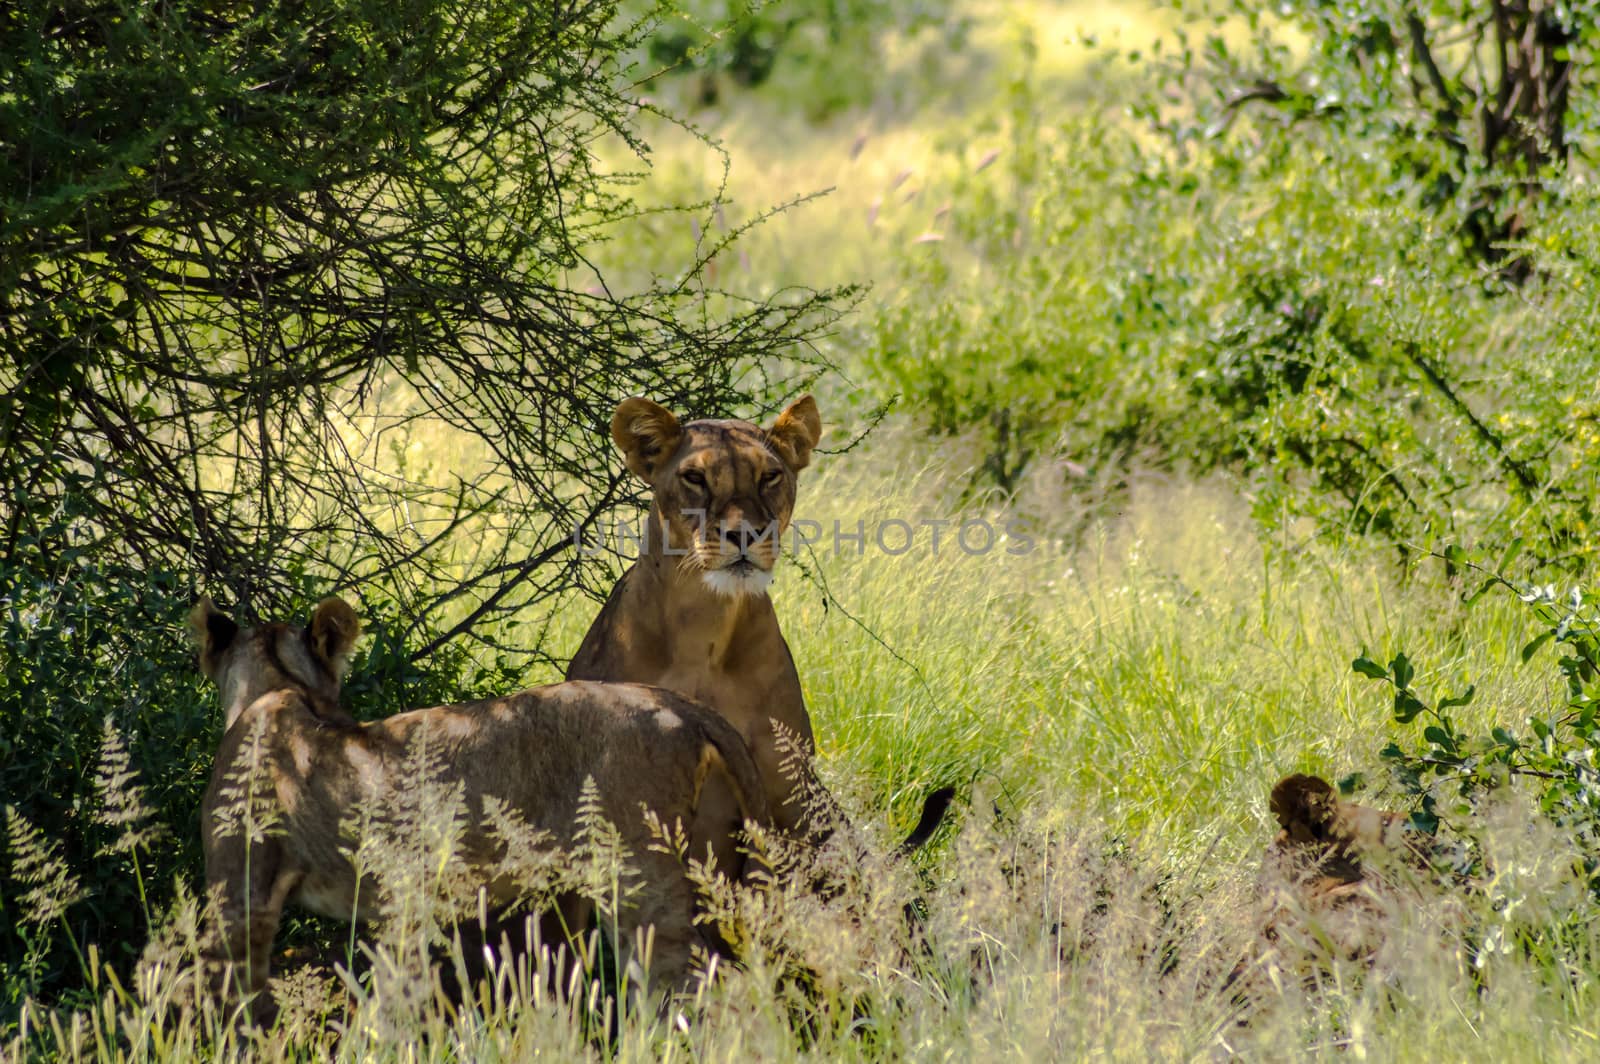 Lioness under a tree in the savannah  by Philou1000